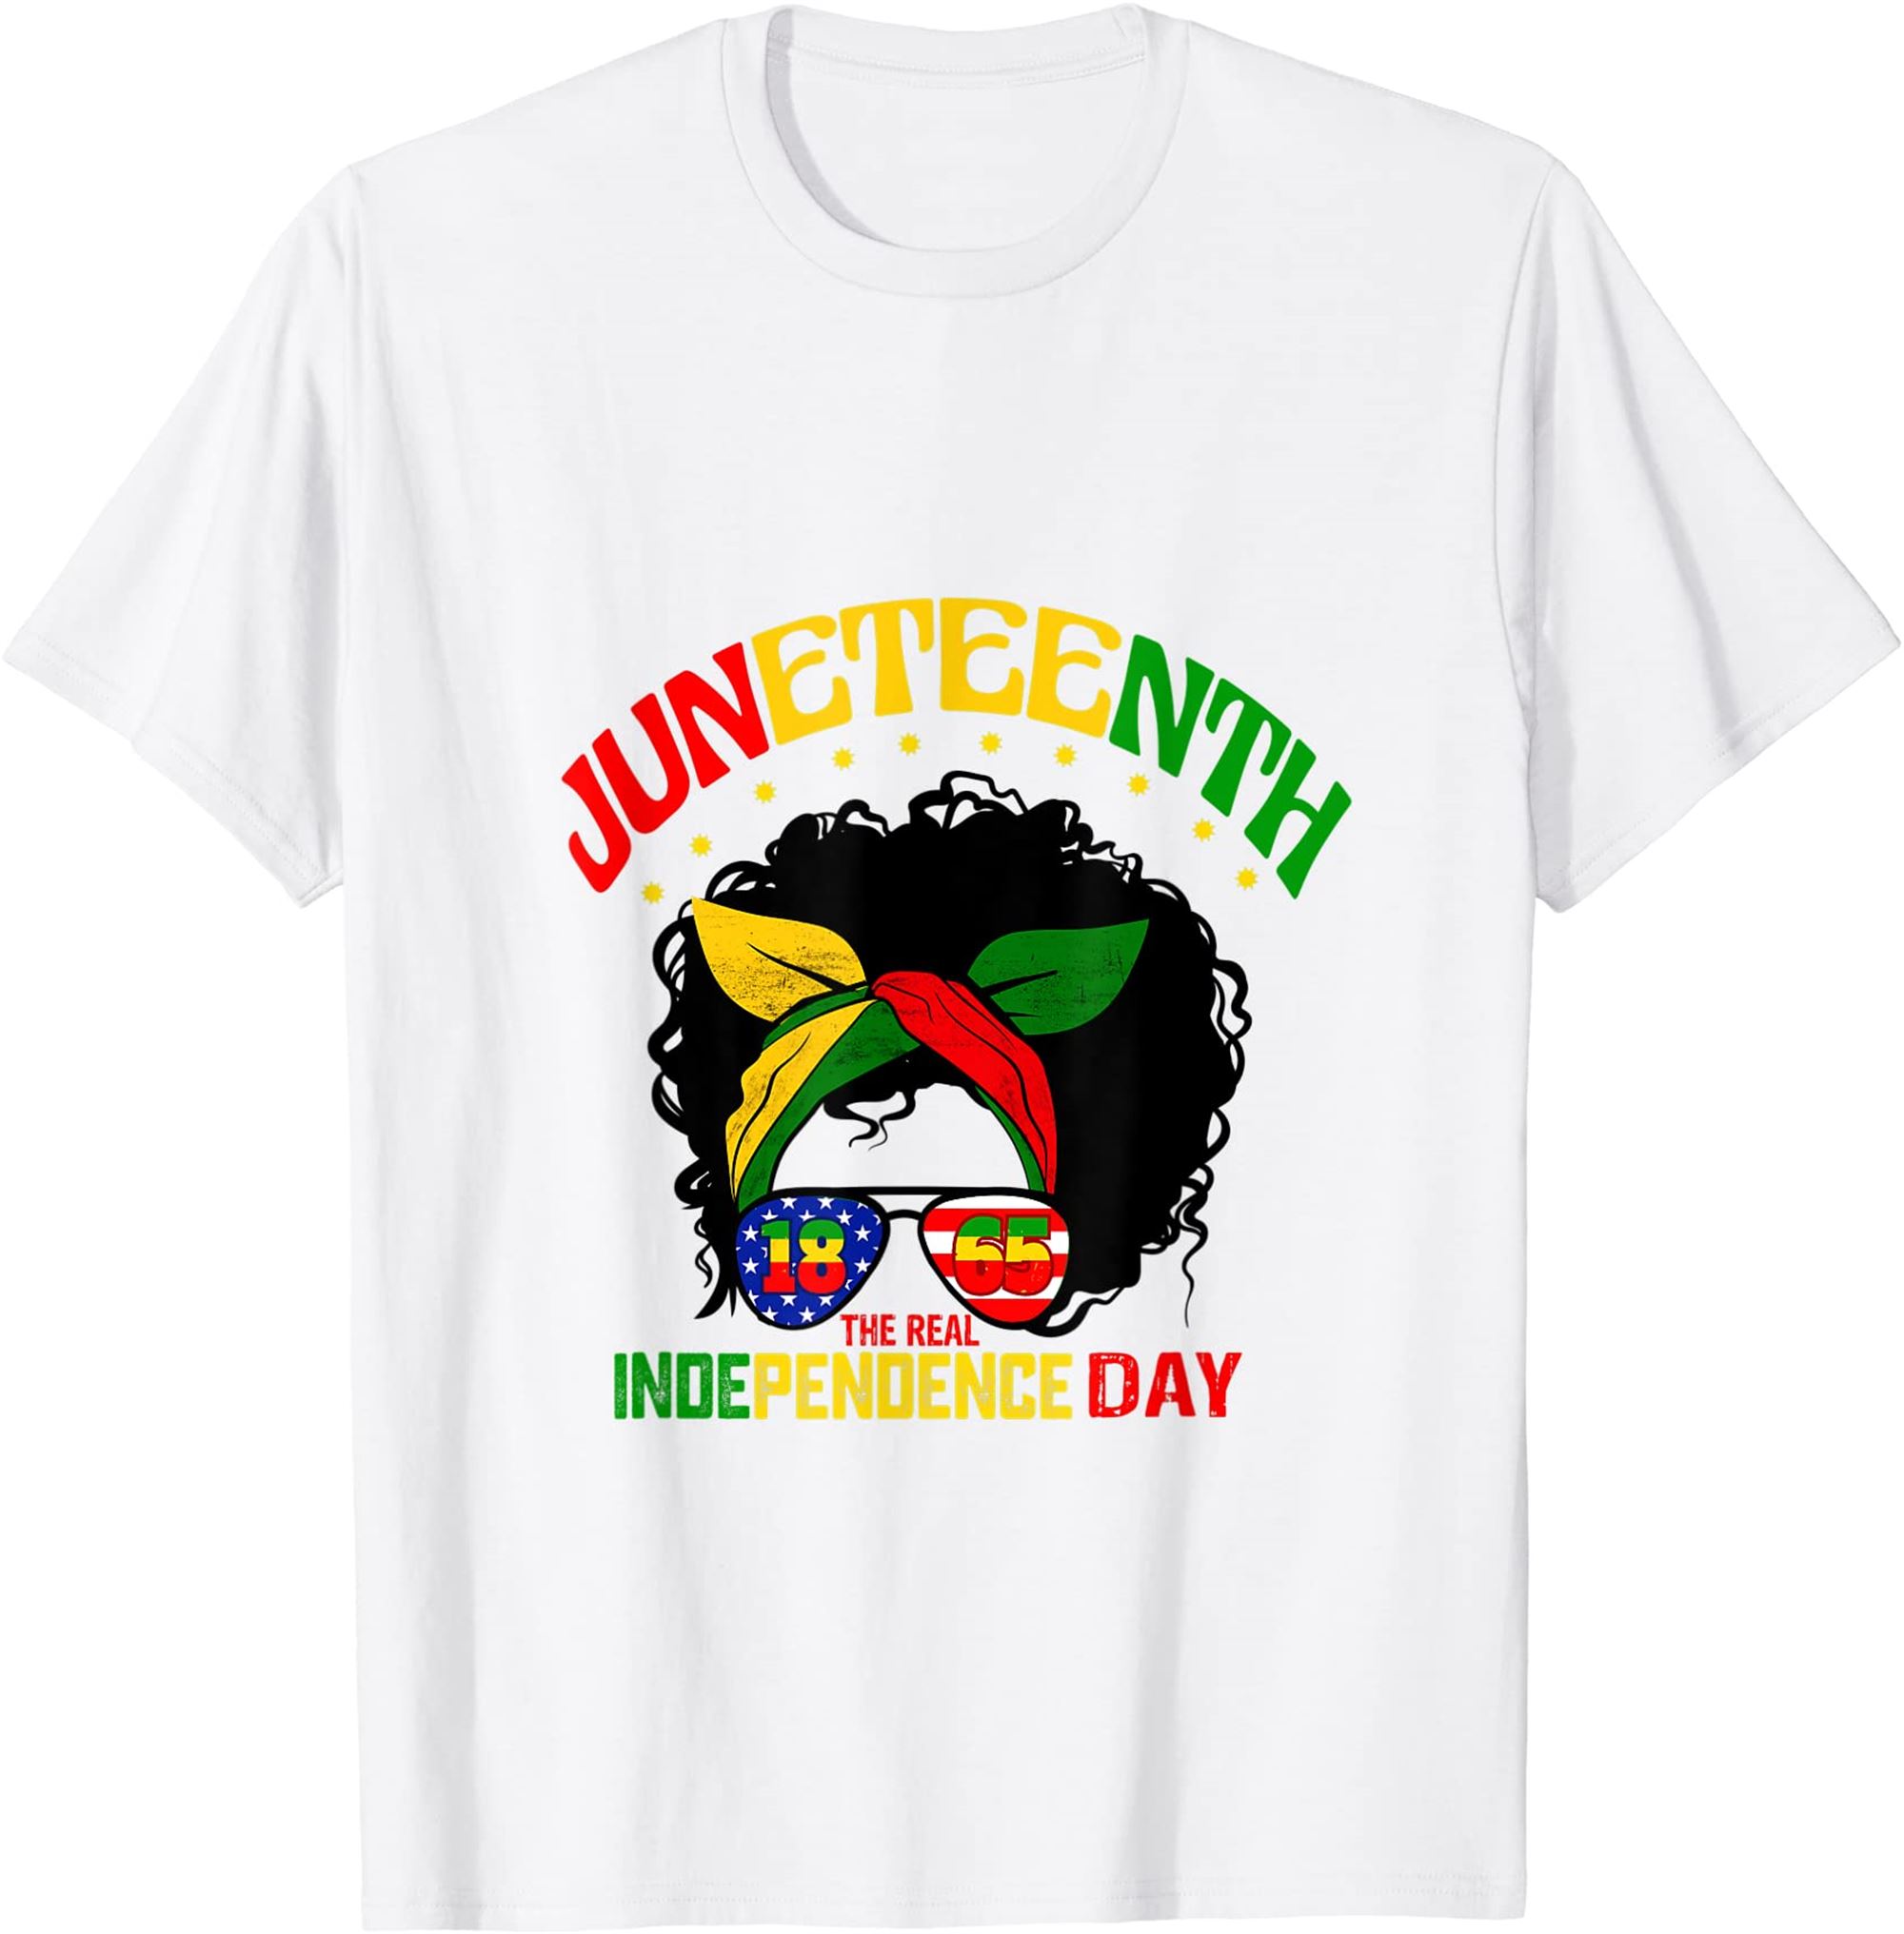 1865 Juneteenth Is My Independence Day For Black Women Girls T-shirt Full Size Up To 5xl